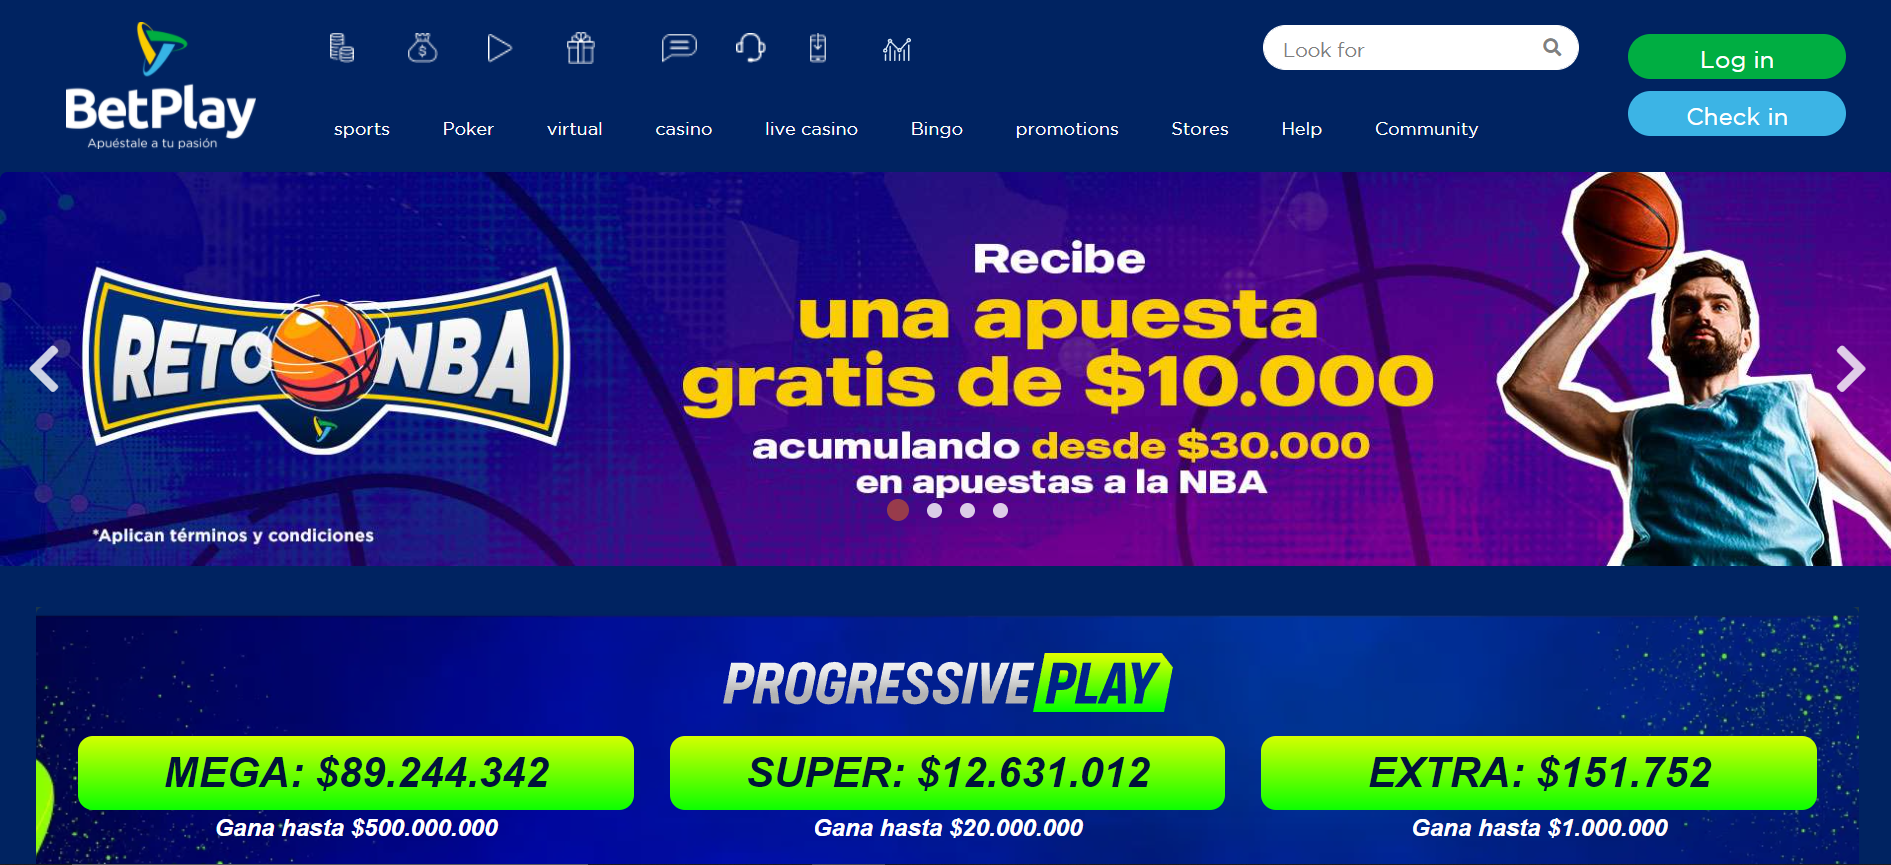 Betplay offers betting options to its new and existing customers with bonuses and commission-free cashouts.